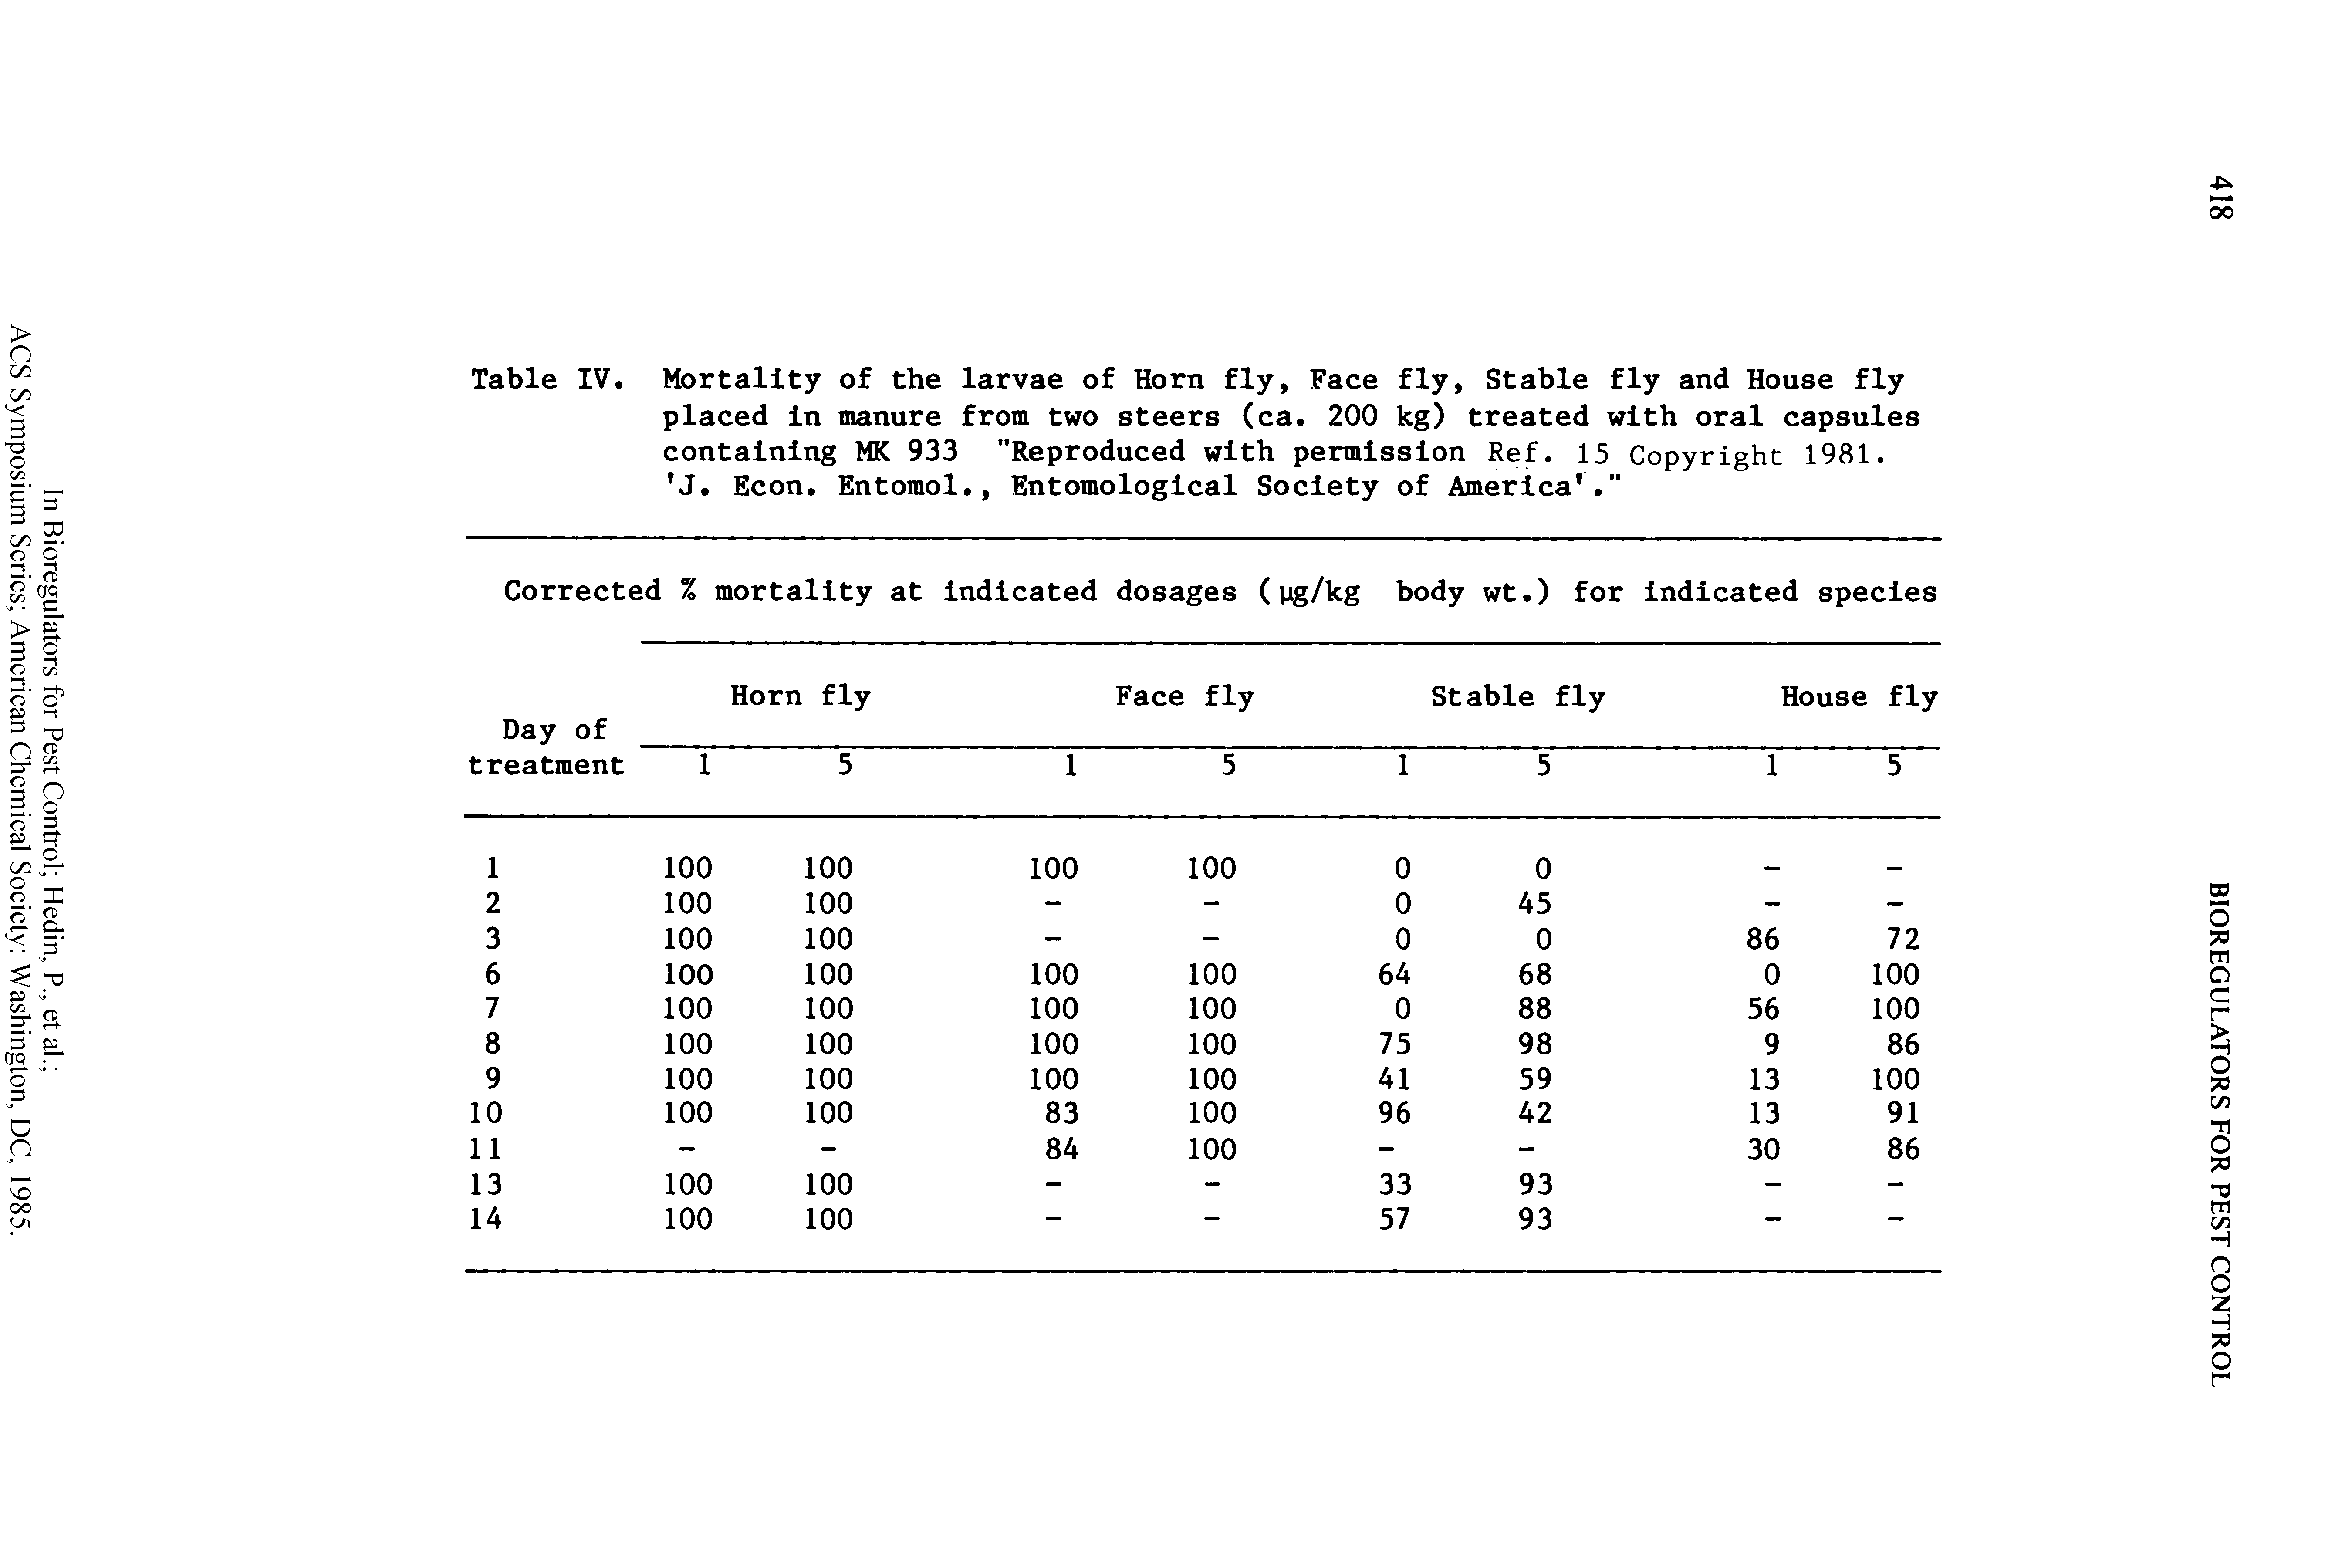 Table IV. Mortality of the larvae of Horn fly, Face fly, Stable fly and House fly placed in manure from two steers (ca. 200 kg) treated with oral capsules containing MK 933 "Reproduced with permission Ref. 15 Copyright 1981. J. Econ. Entomol., Entomological Society of America. "...